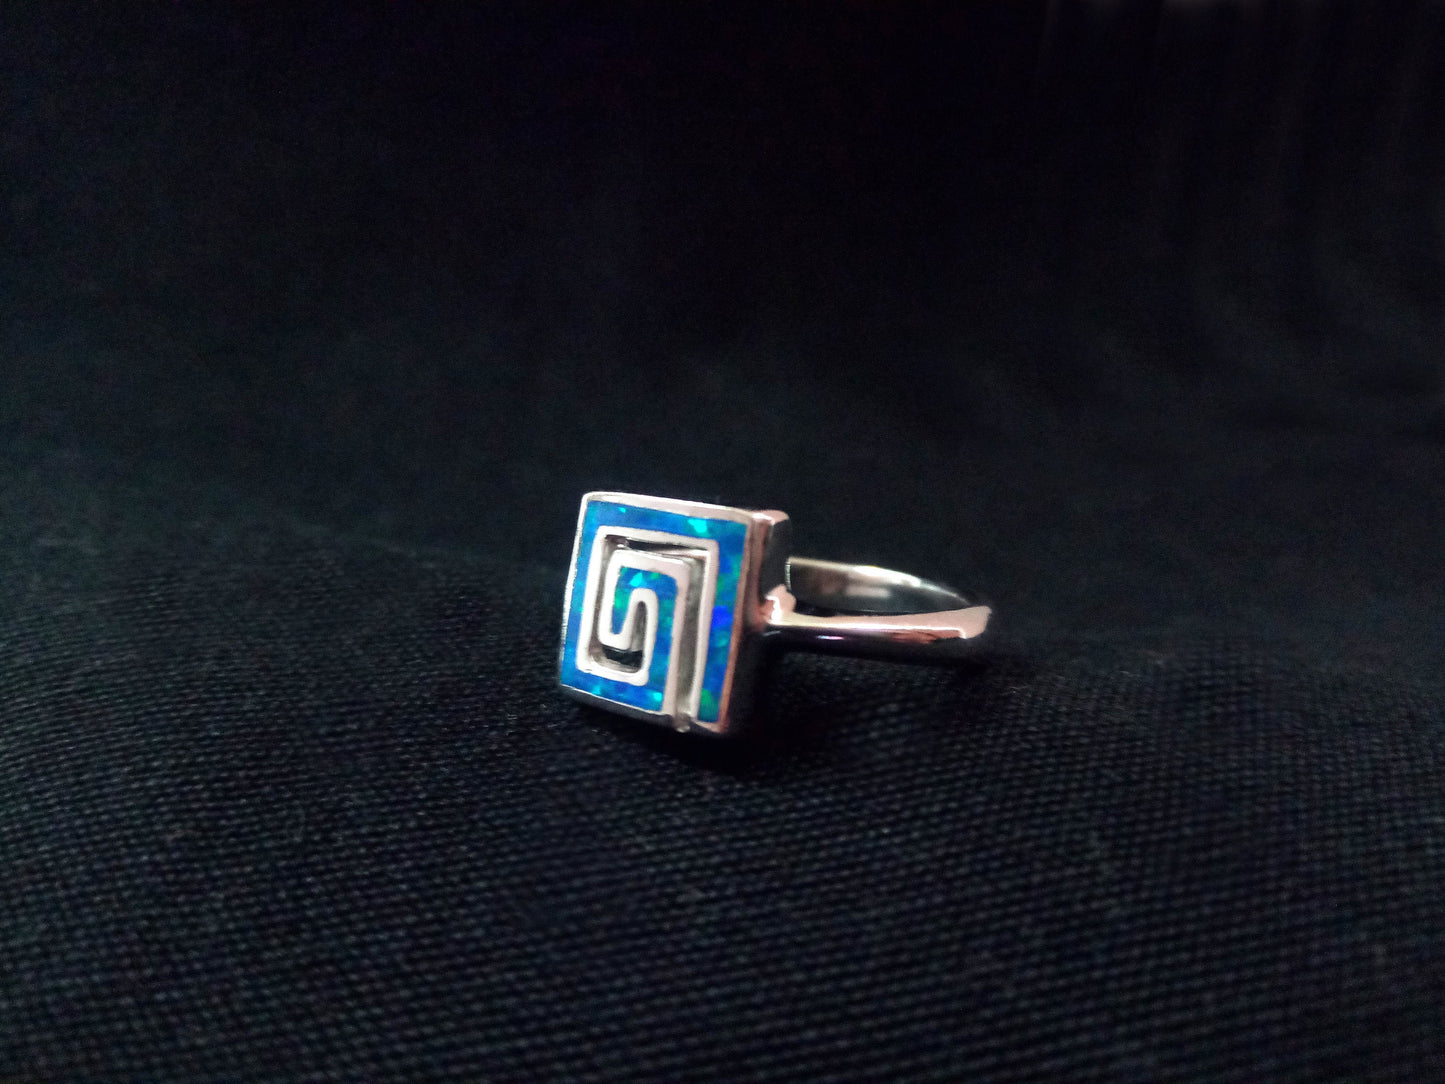 Sterling Silver 925 Meander Opal Square Ring, Greek Key Blue Opal Ring US8, Greek Opal Jewelry, Griechisches Opal Silber Ring, Bague Grecque